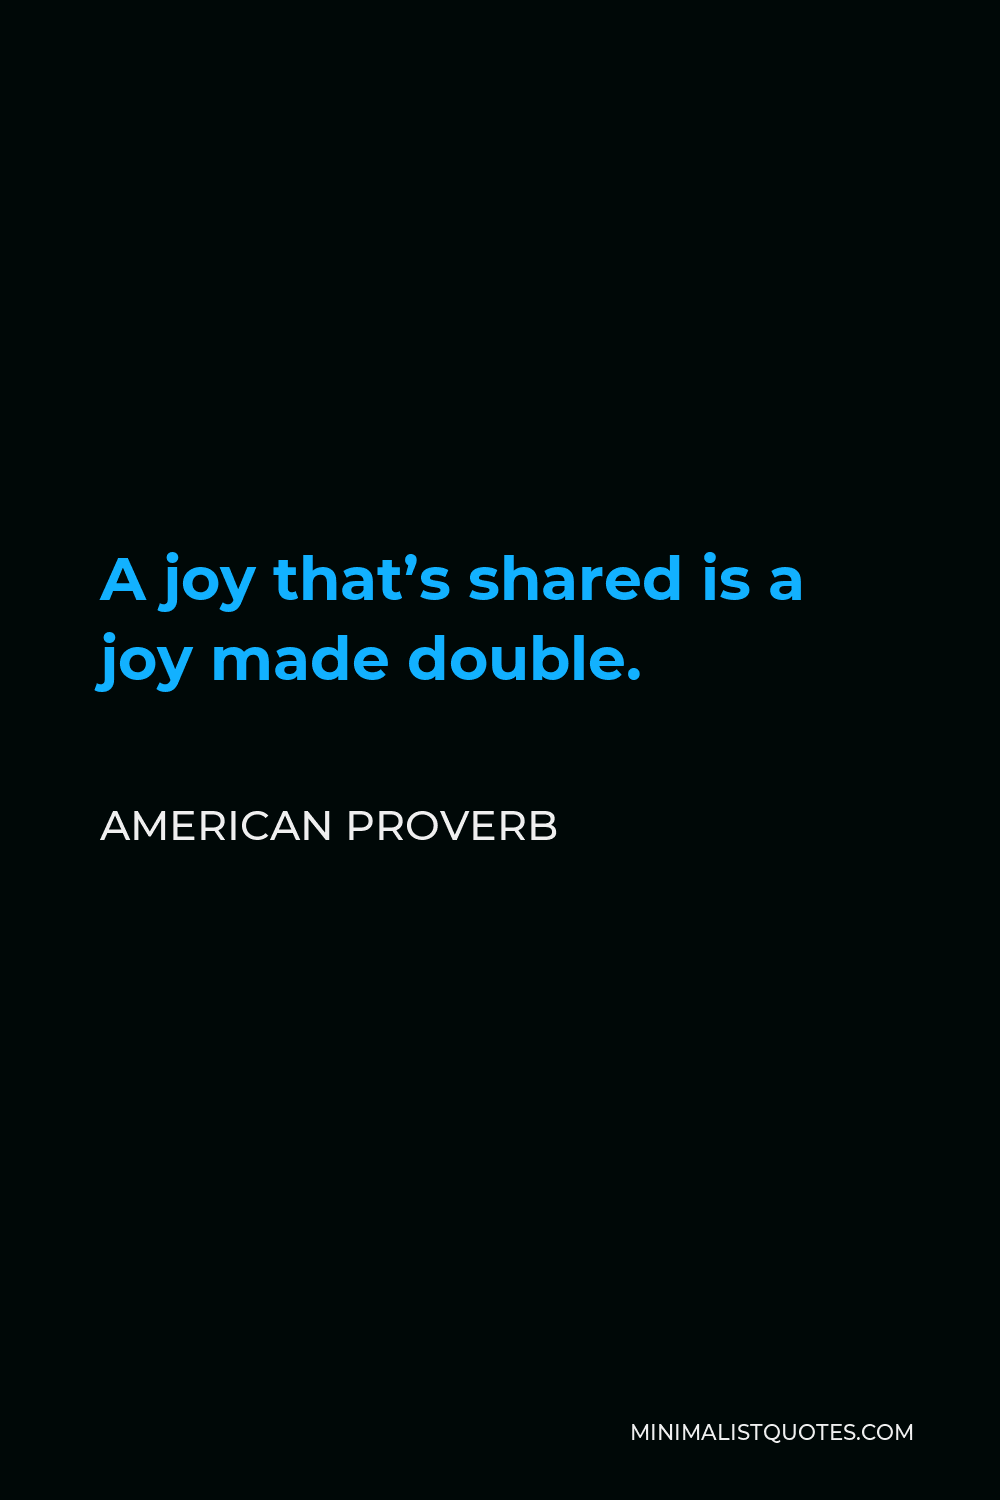 American Proverb Quote - A joy that’s shared is a joy made double.